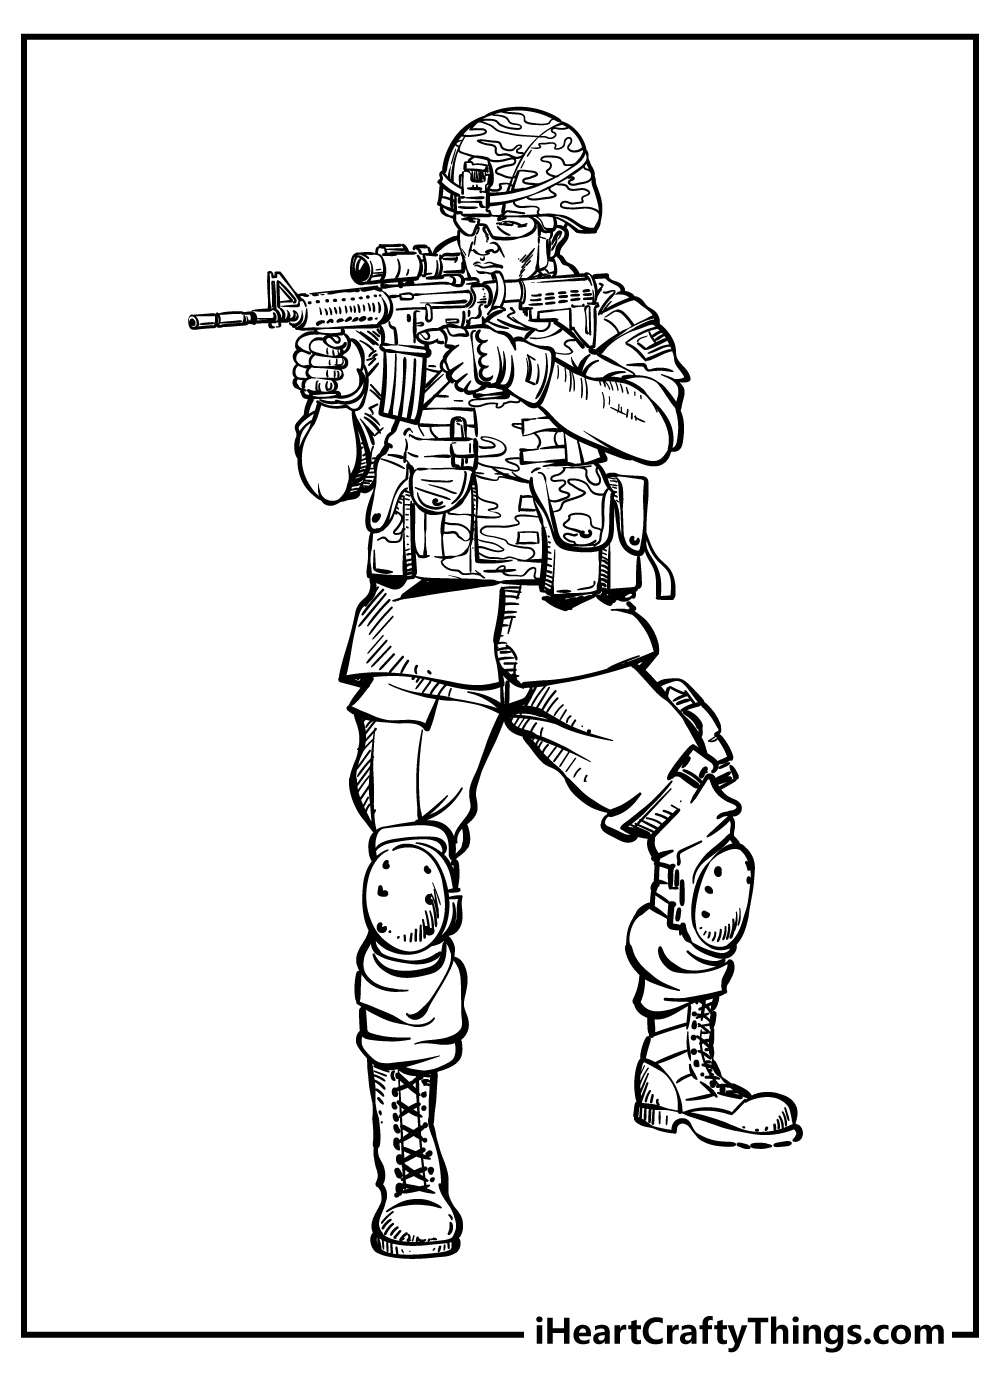 Army Coloring Pages for adults free printable